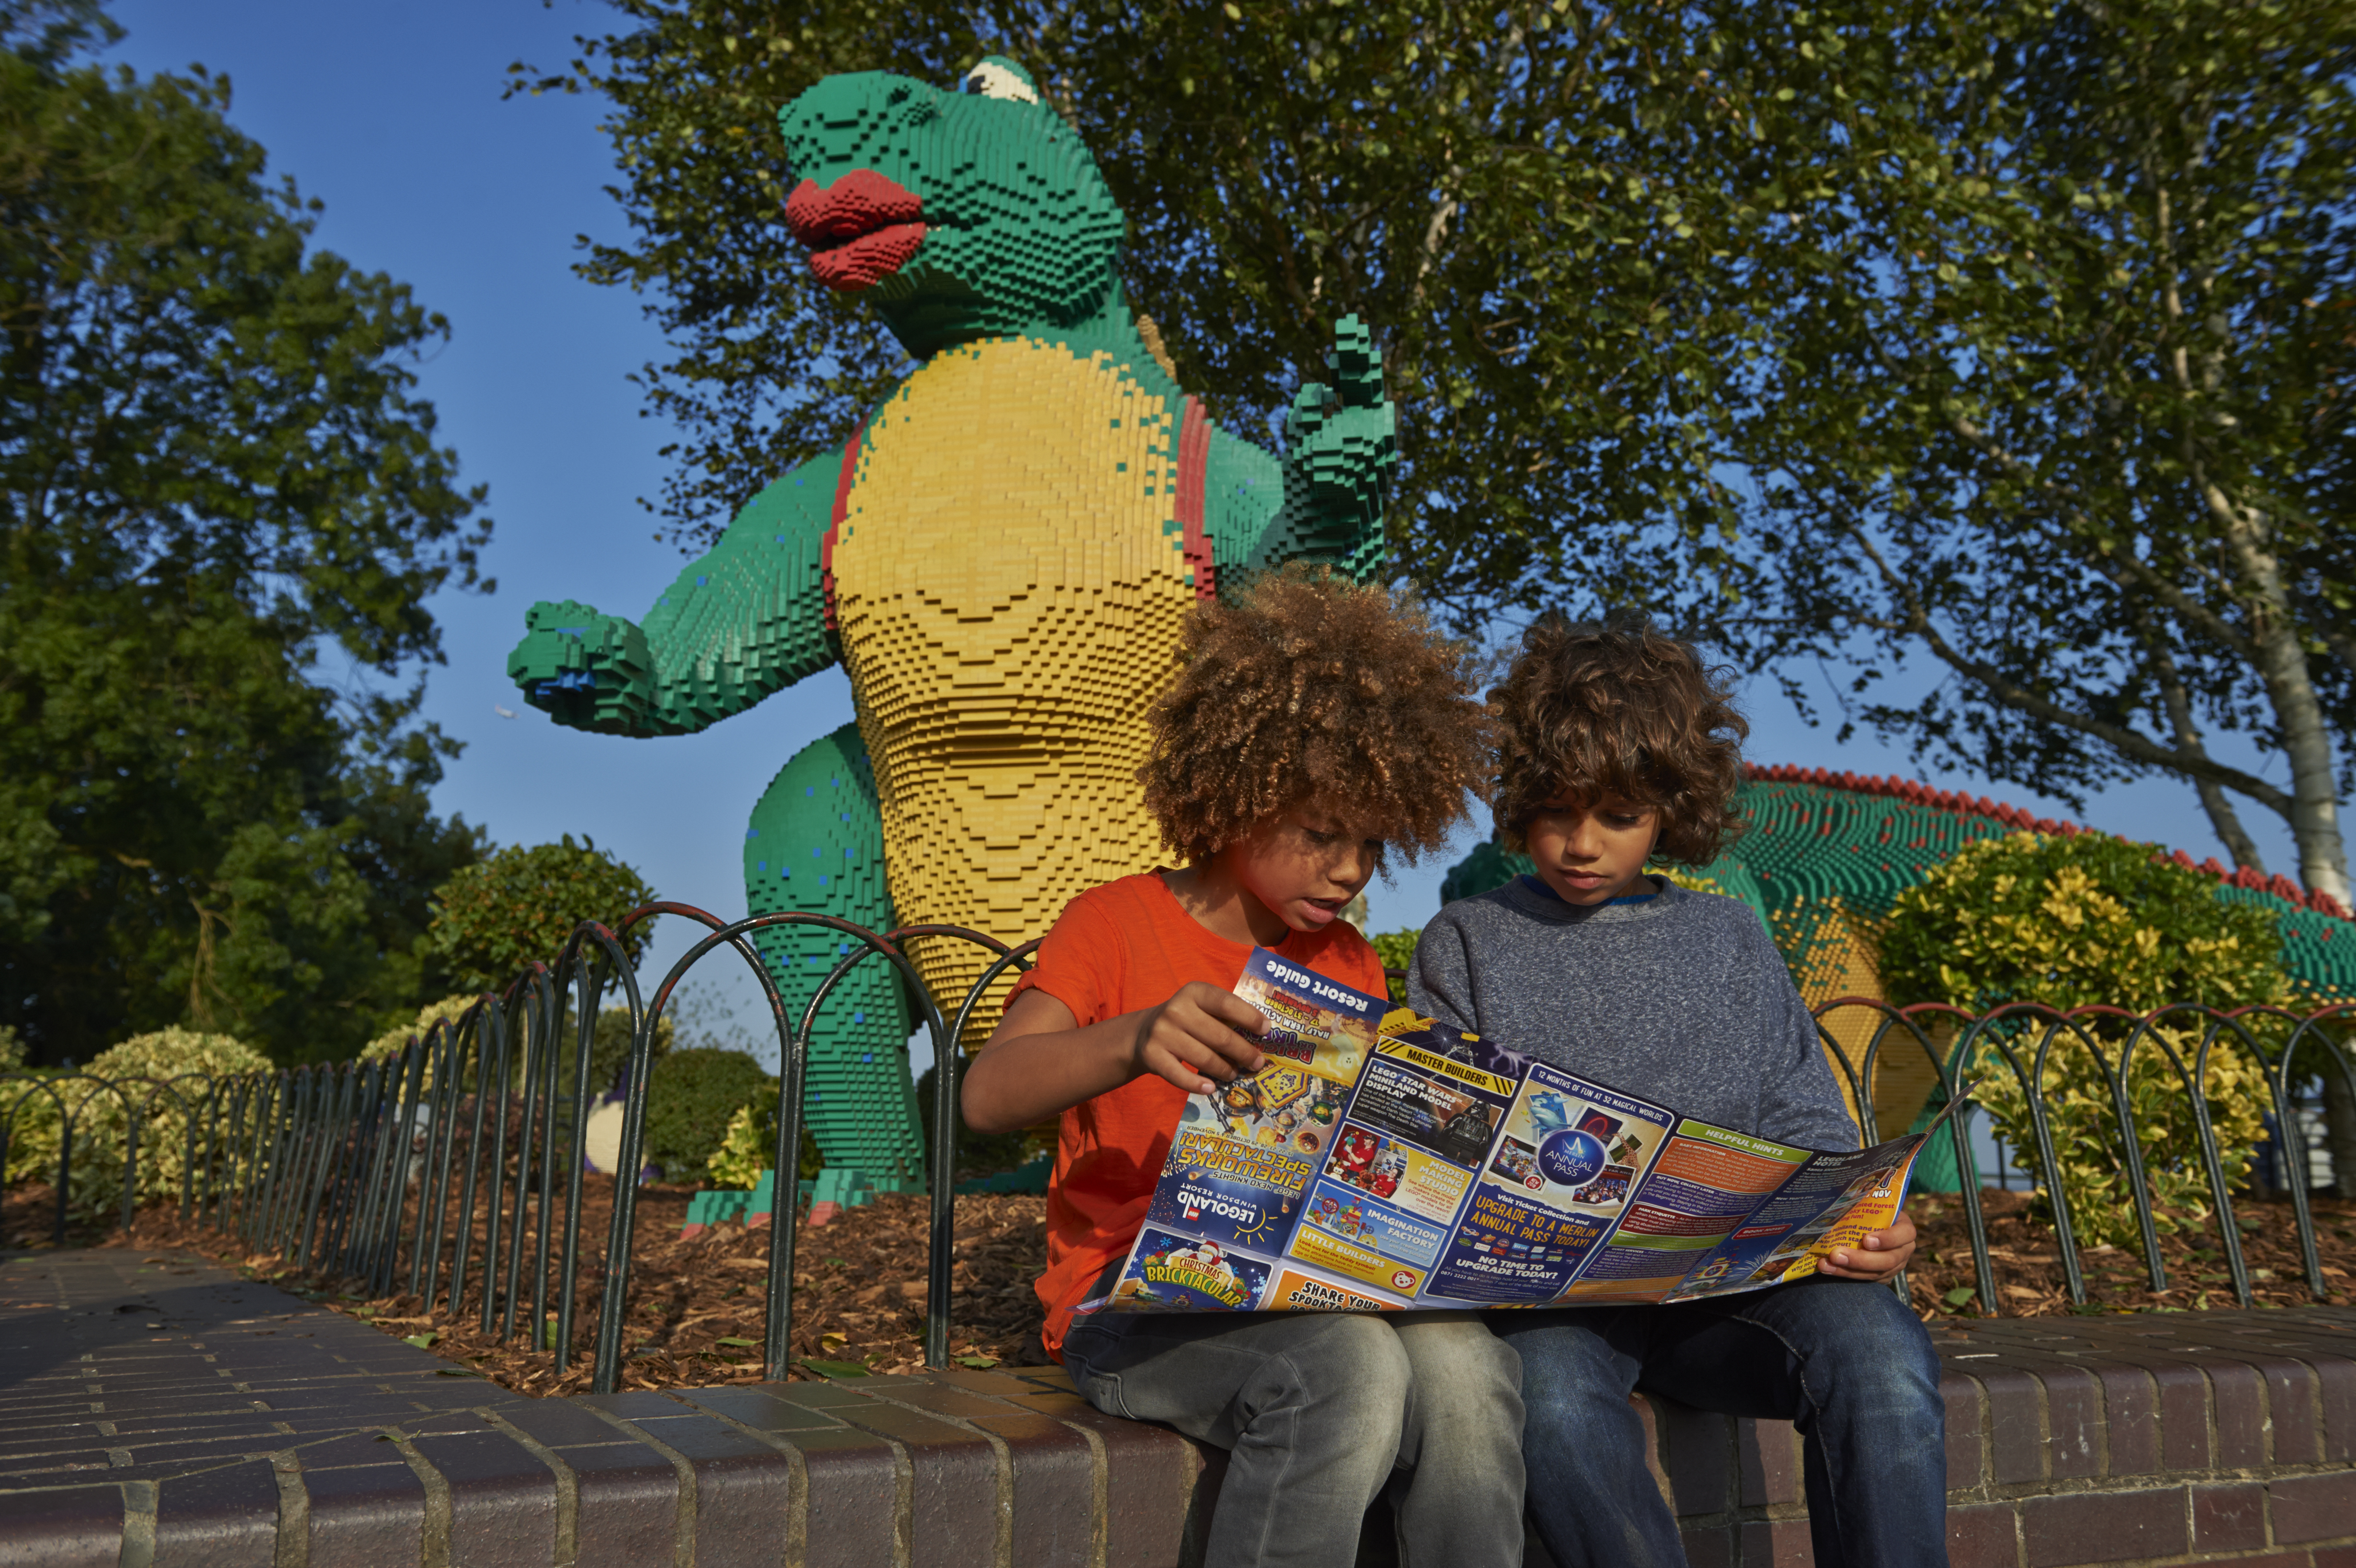 Children looking at map in front of LEGO model of a dinosaur